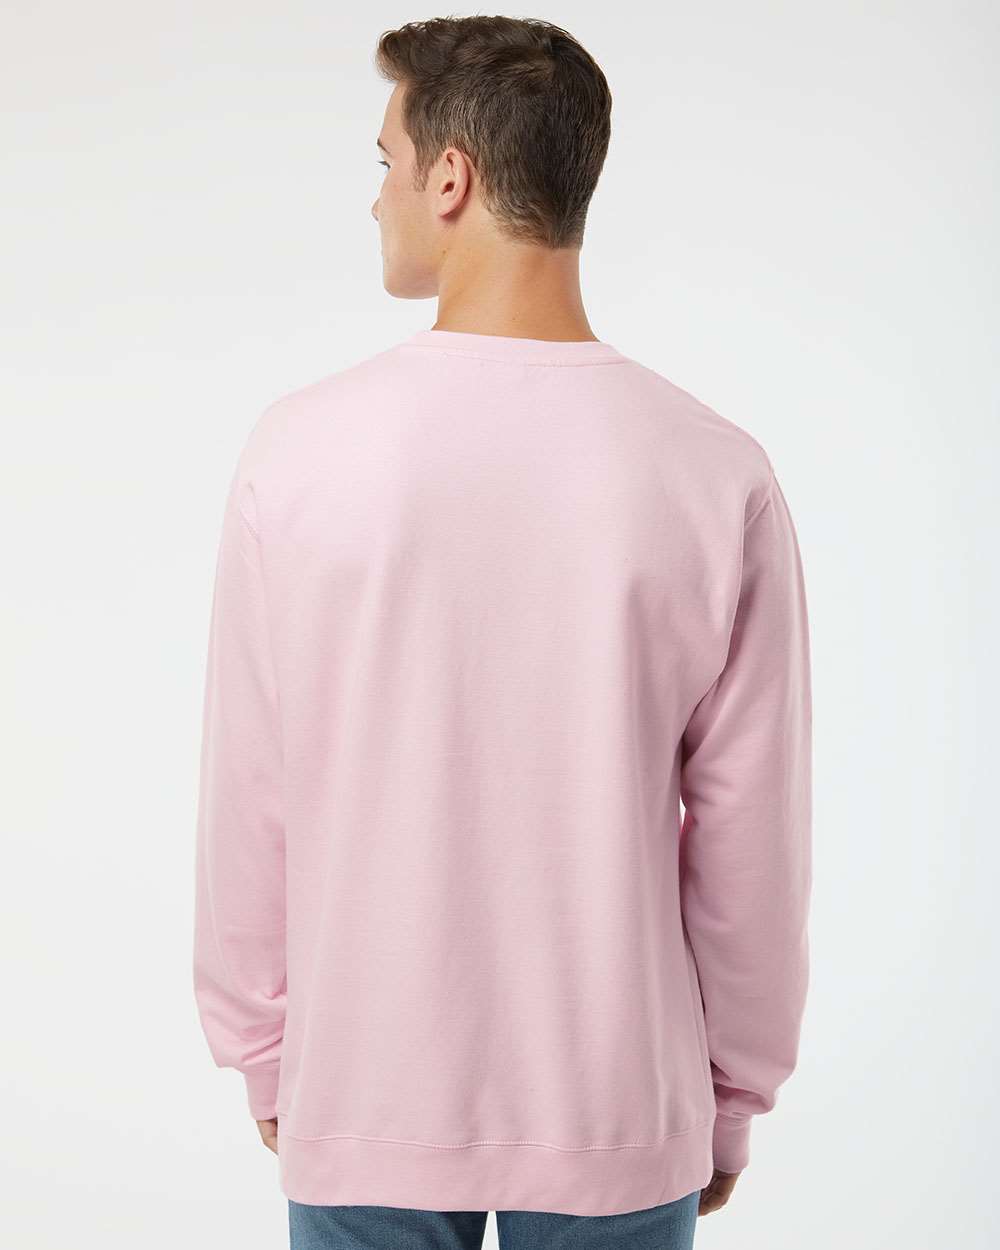 Independent Trading Co. Midweight Sweatshirt SS3000 #colormdl_Light Pink